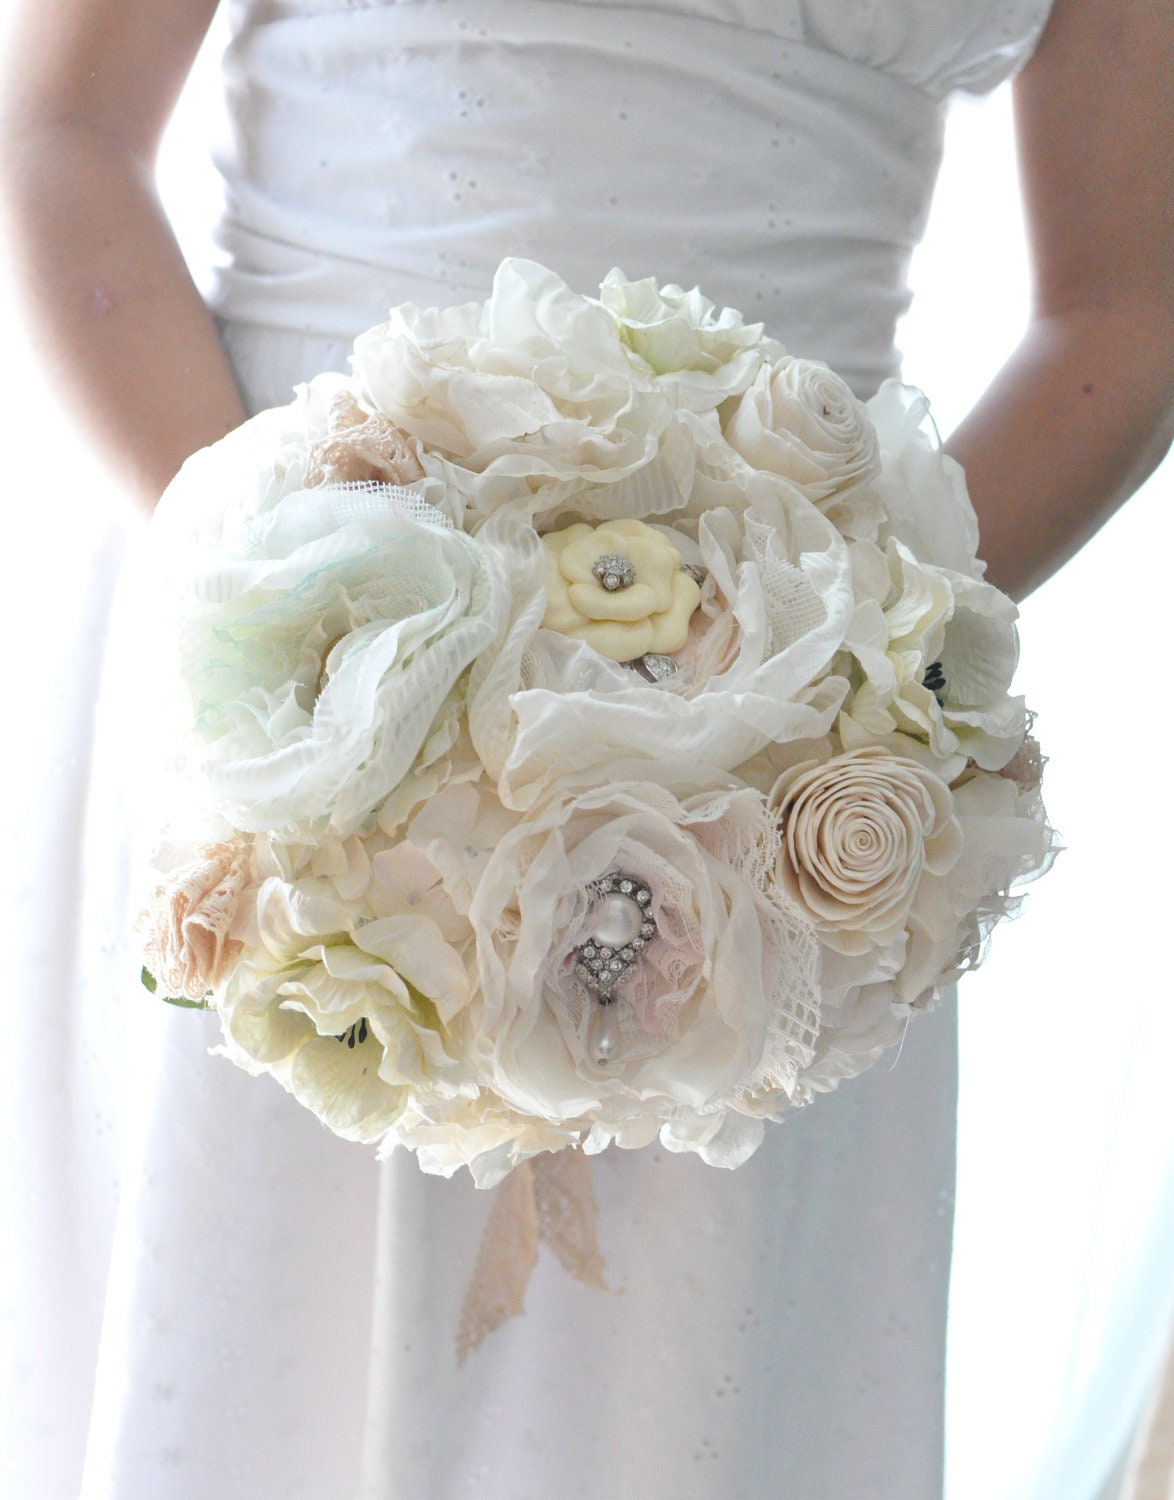 Vintage wedding bouquet, Deposit for oldworld charm lace, pearls among paper flowers and seafaom, blush pink and pastel peach fabric flowers